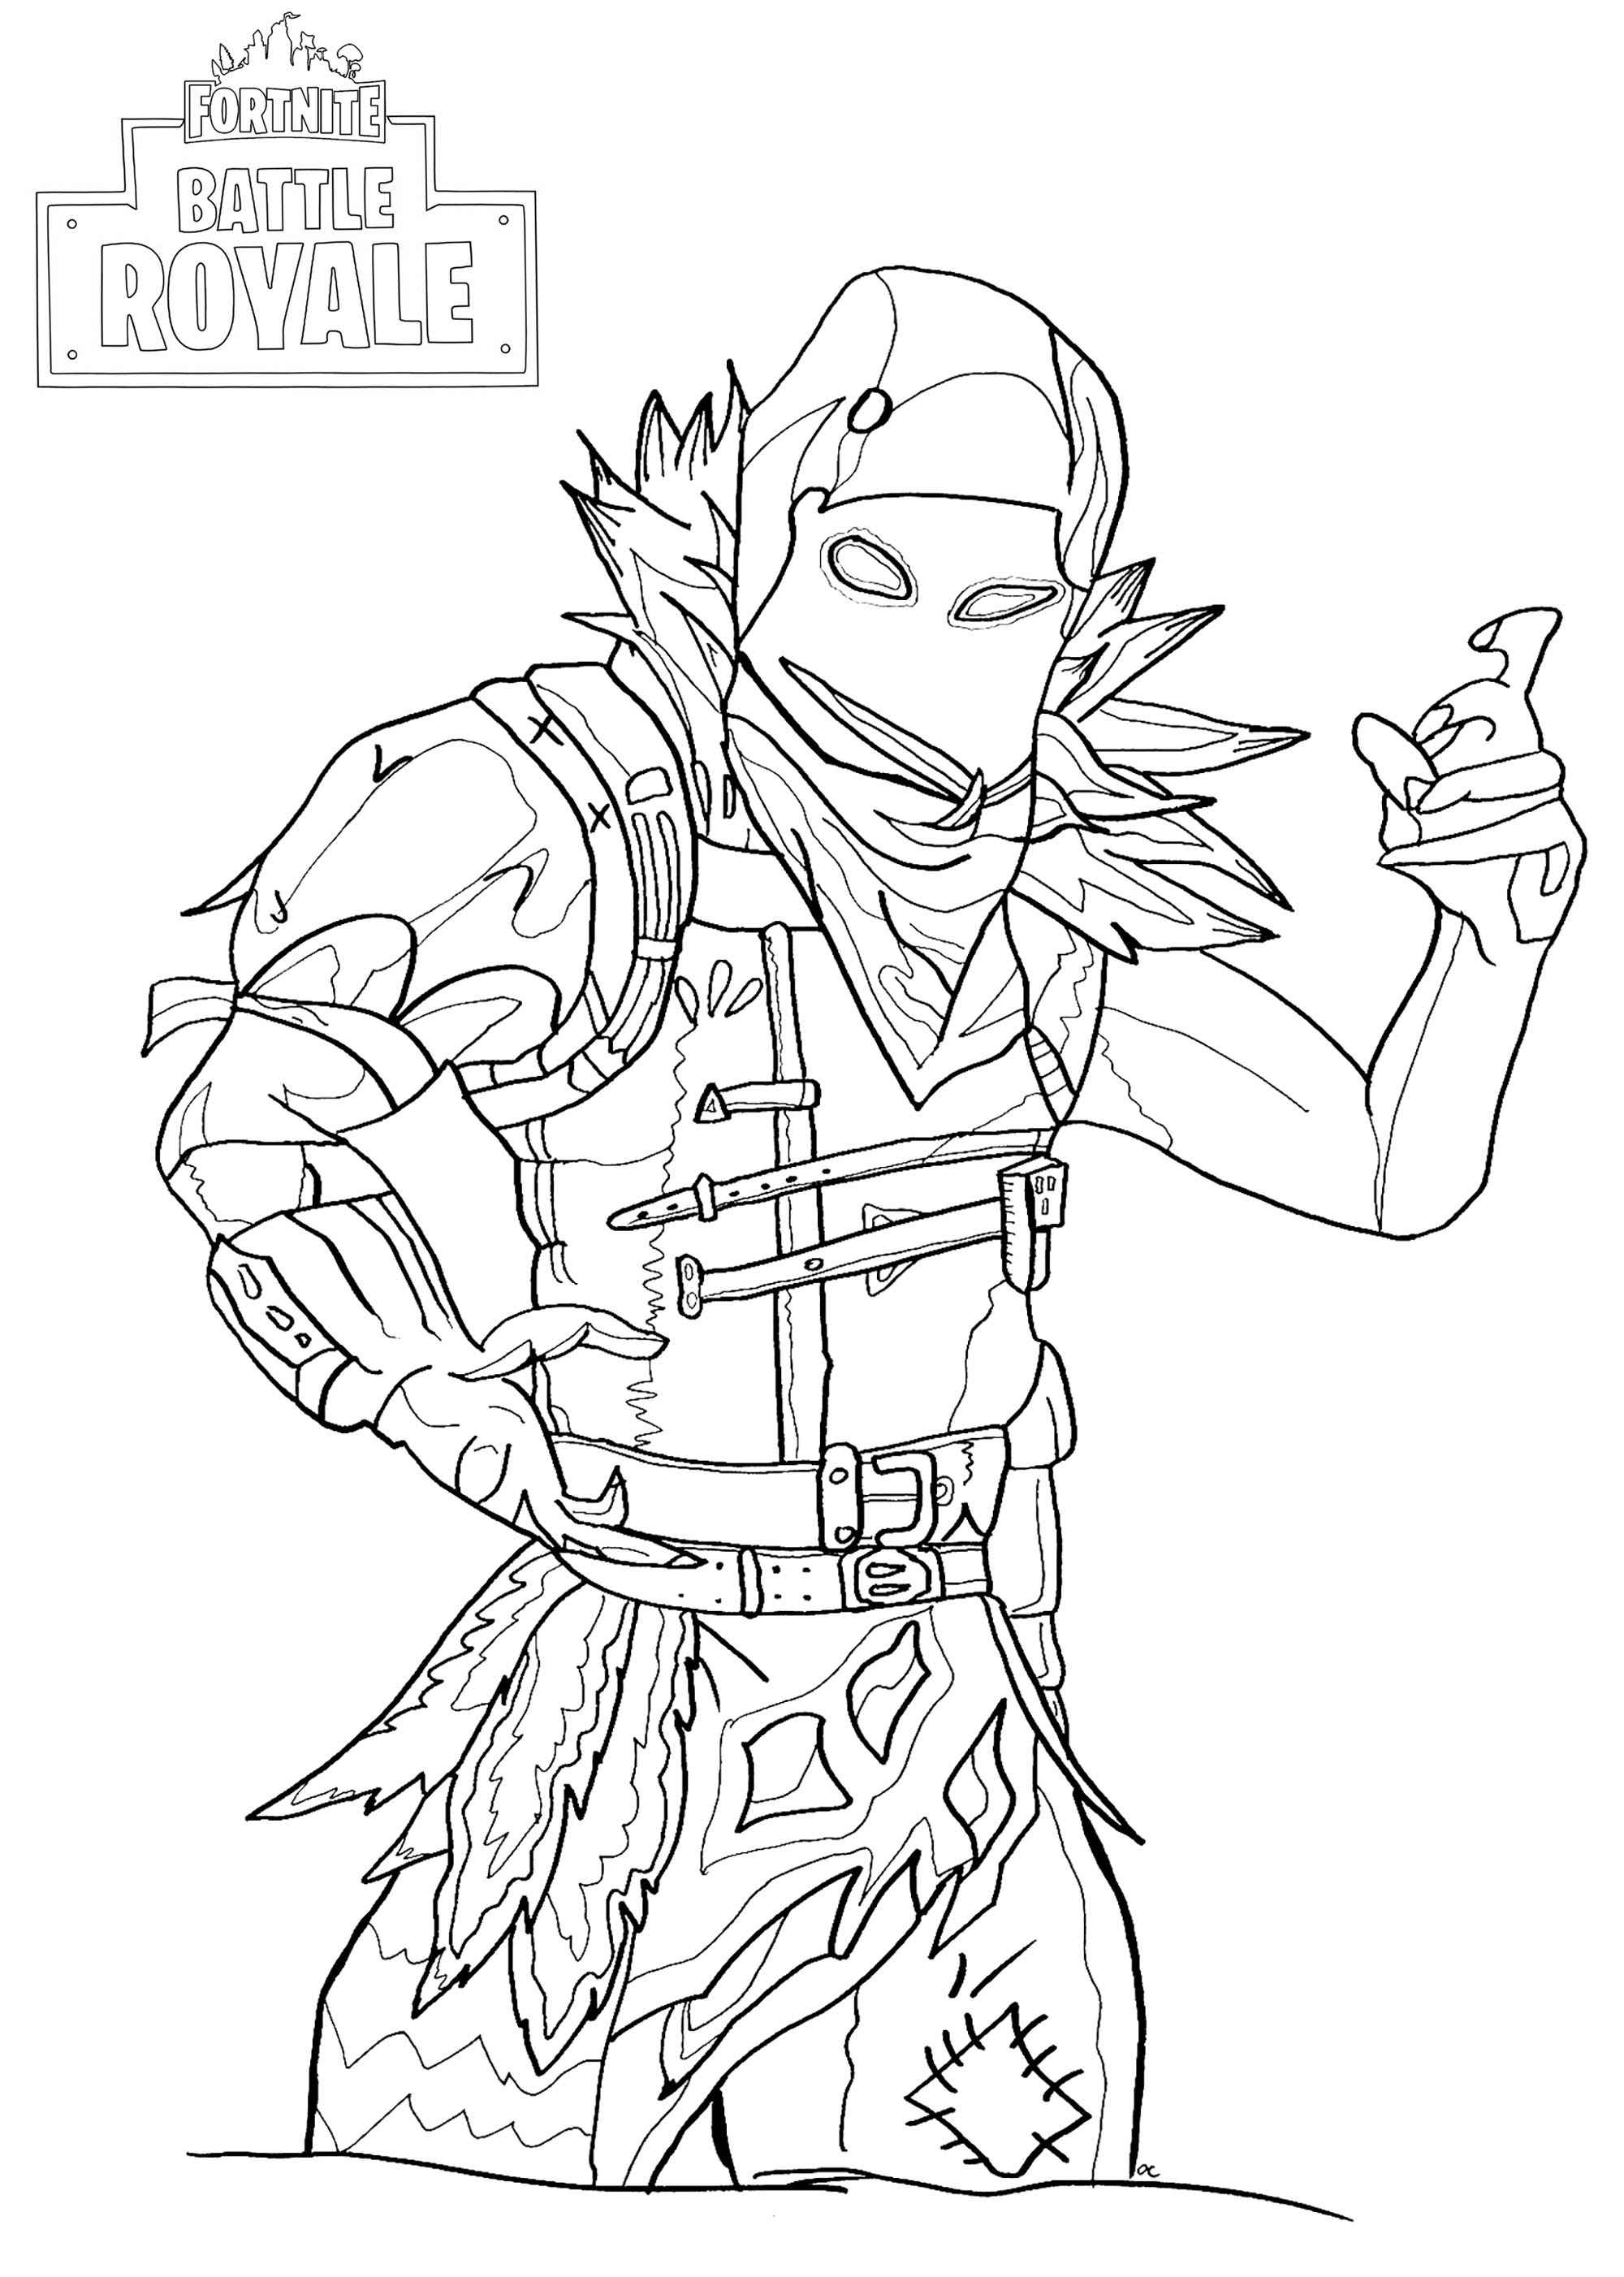 Top 10 Fortnite Coloring Pages Free - COLORING PAGES FOR KIDS FREE